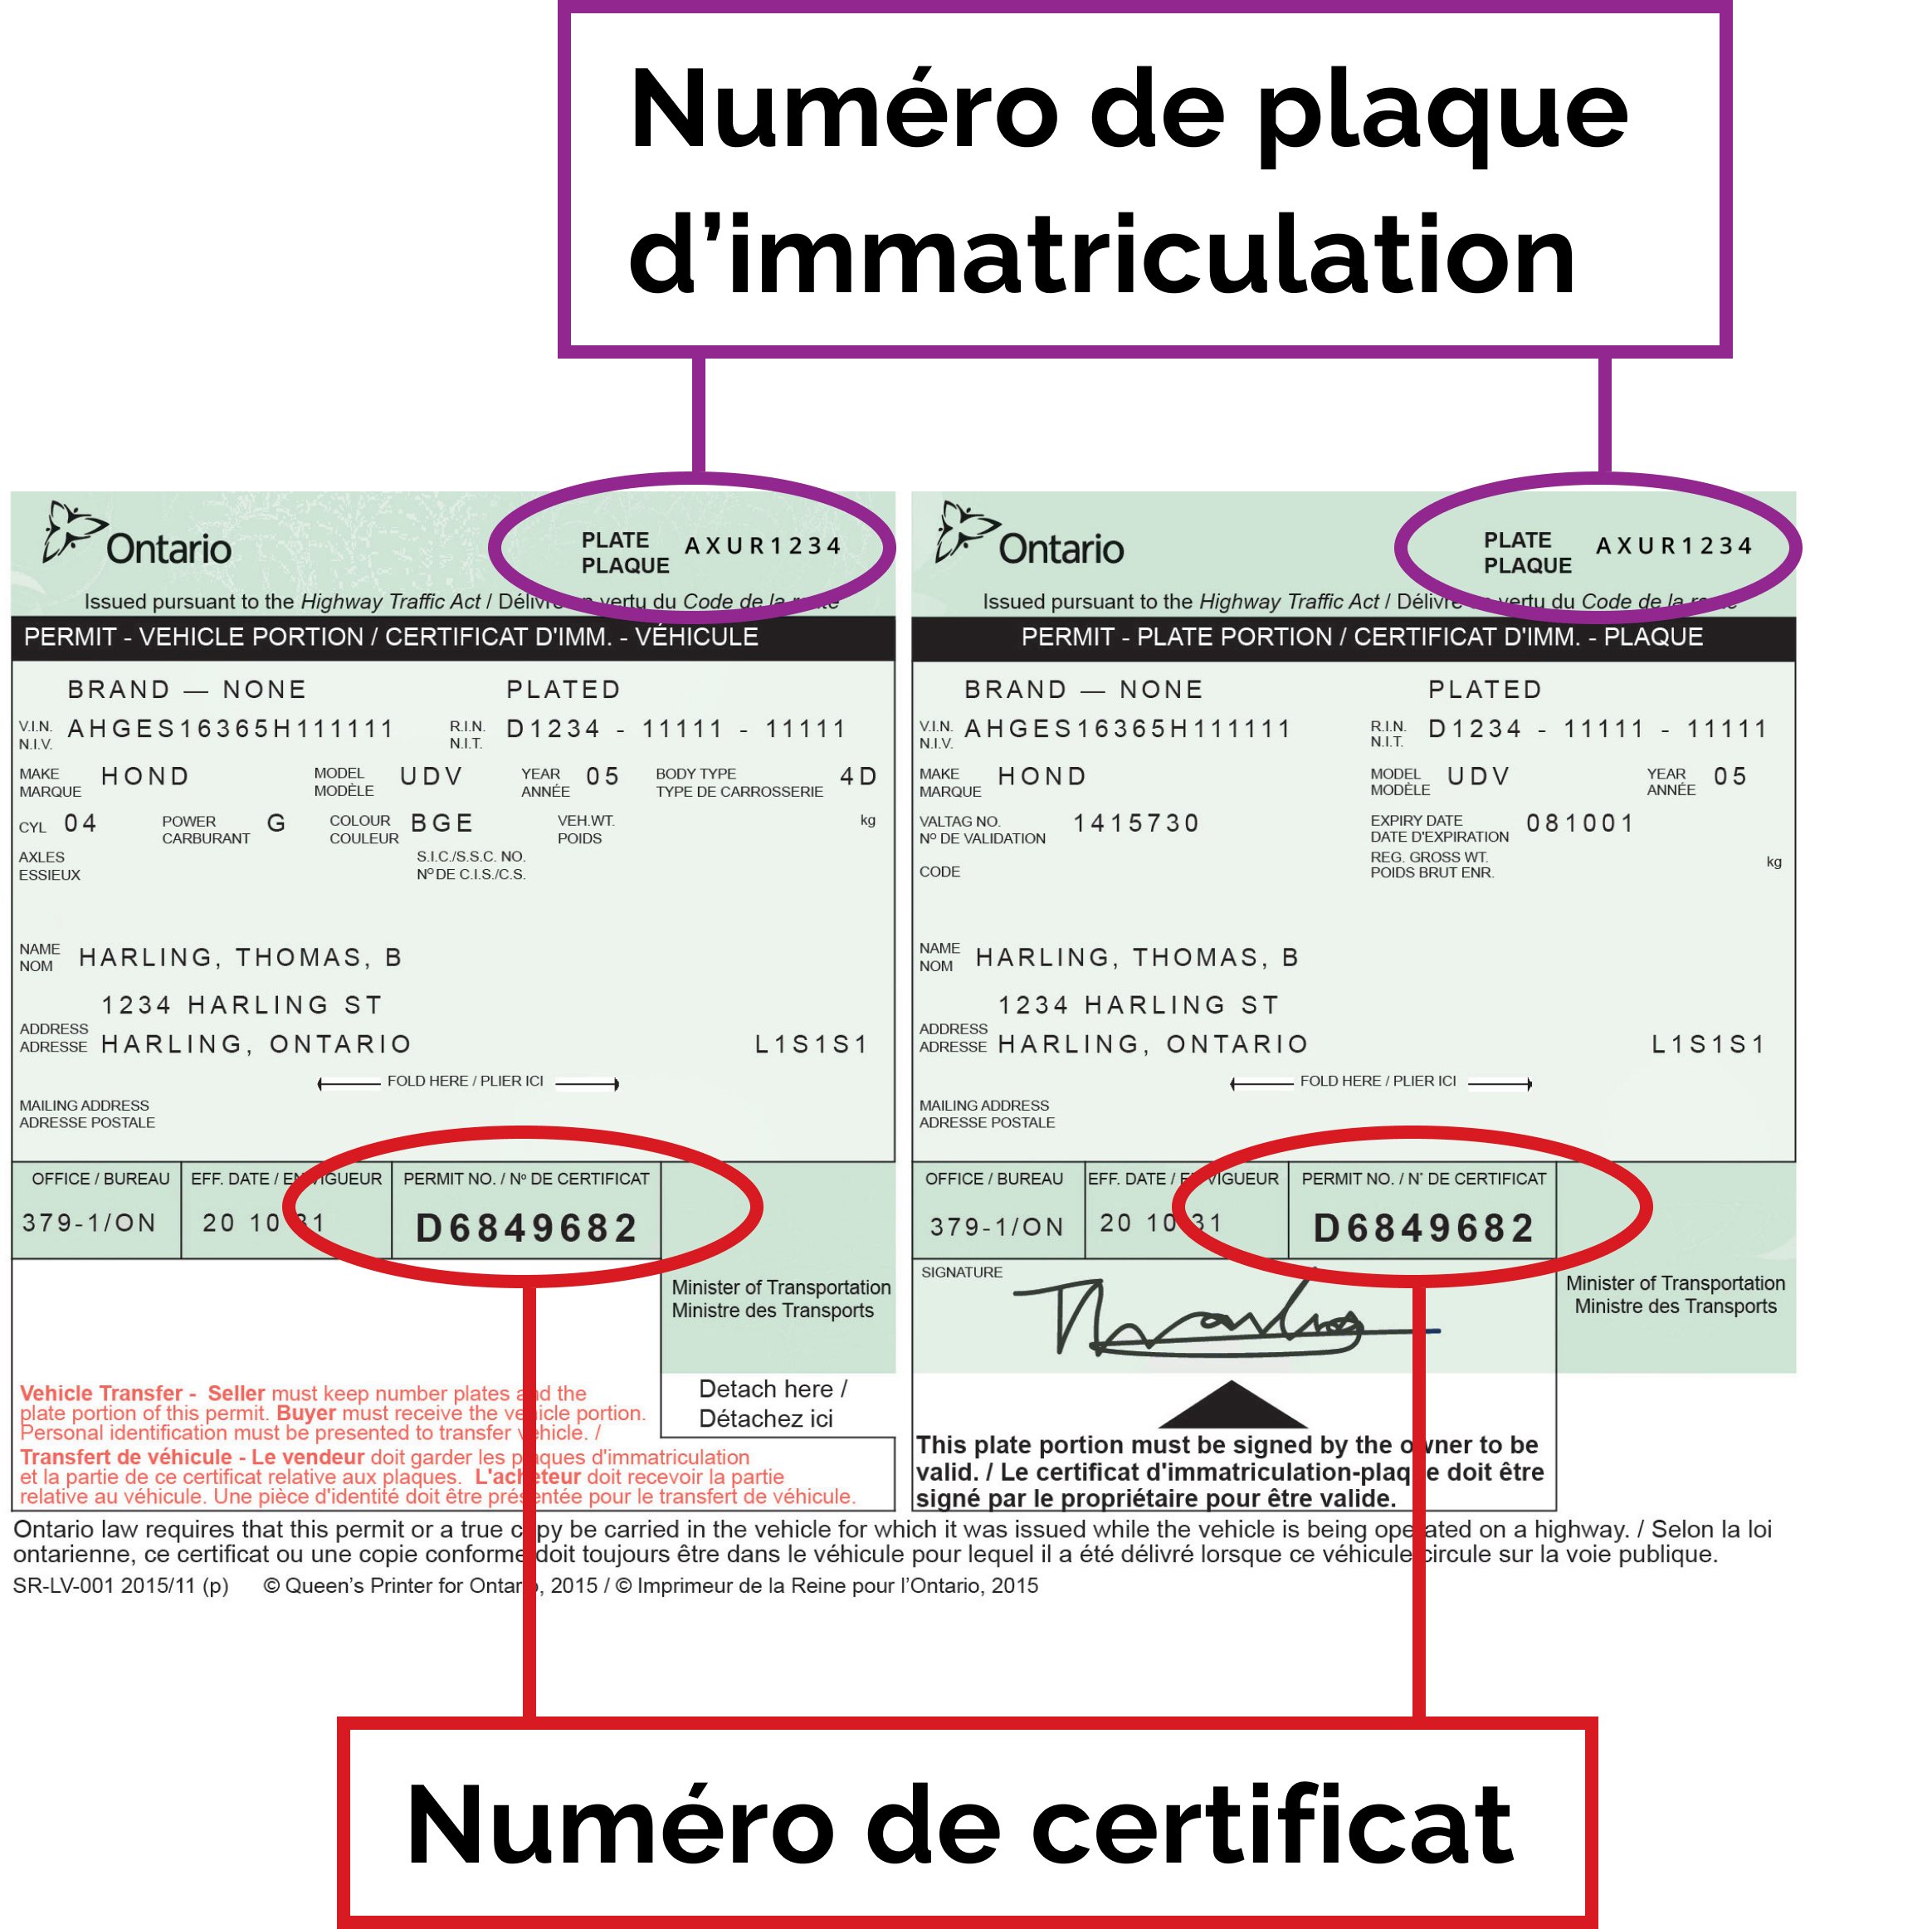 An image of the Ontario vehicle permit highlighting the licence plate number at the top and permit number at the bottom.